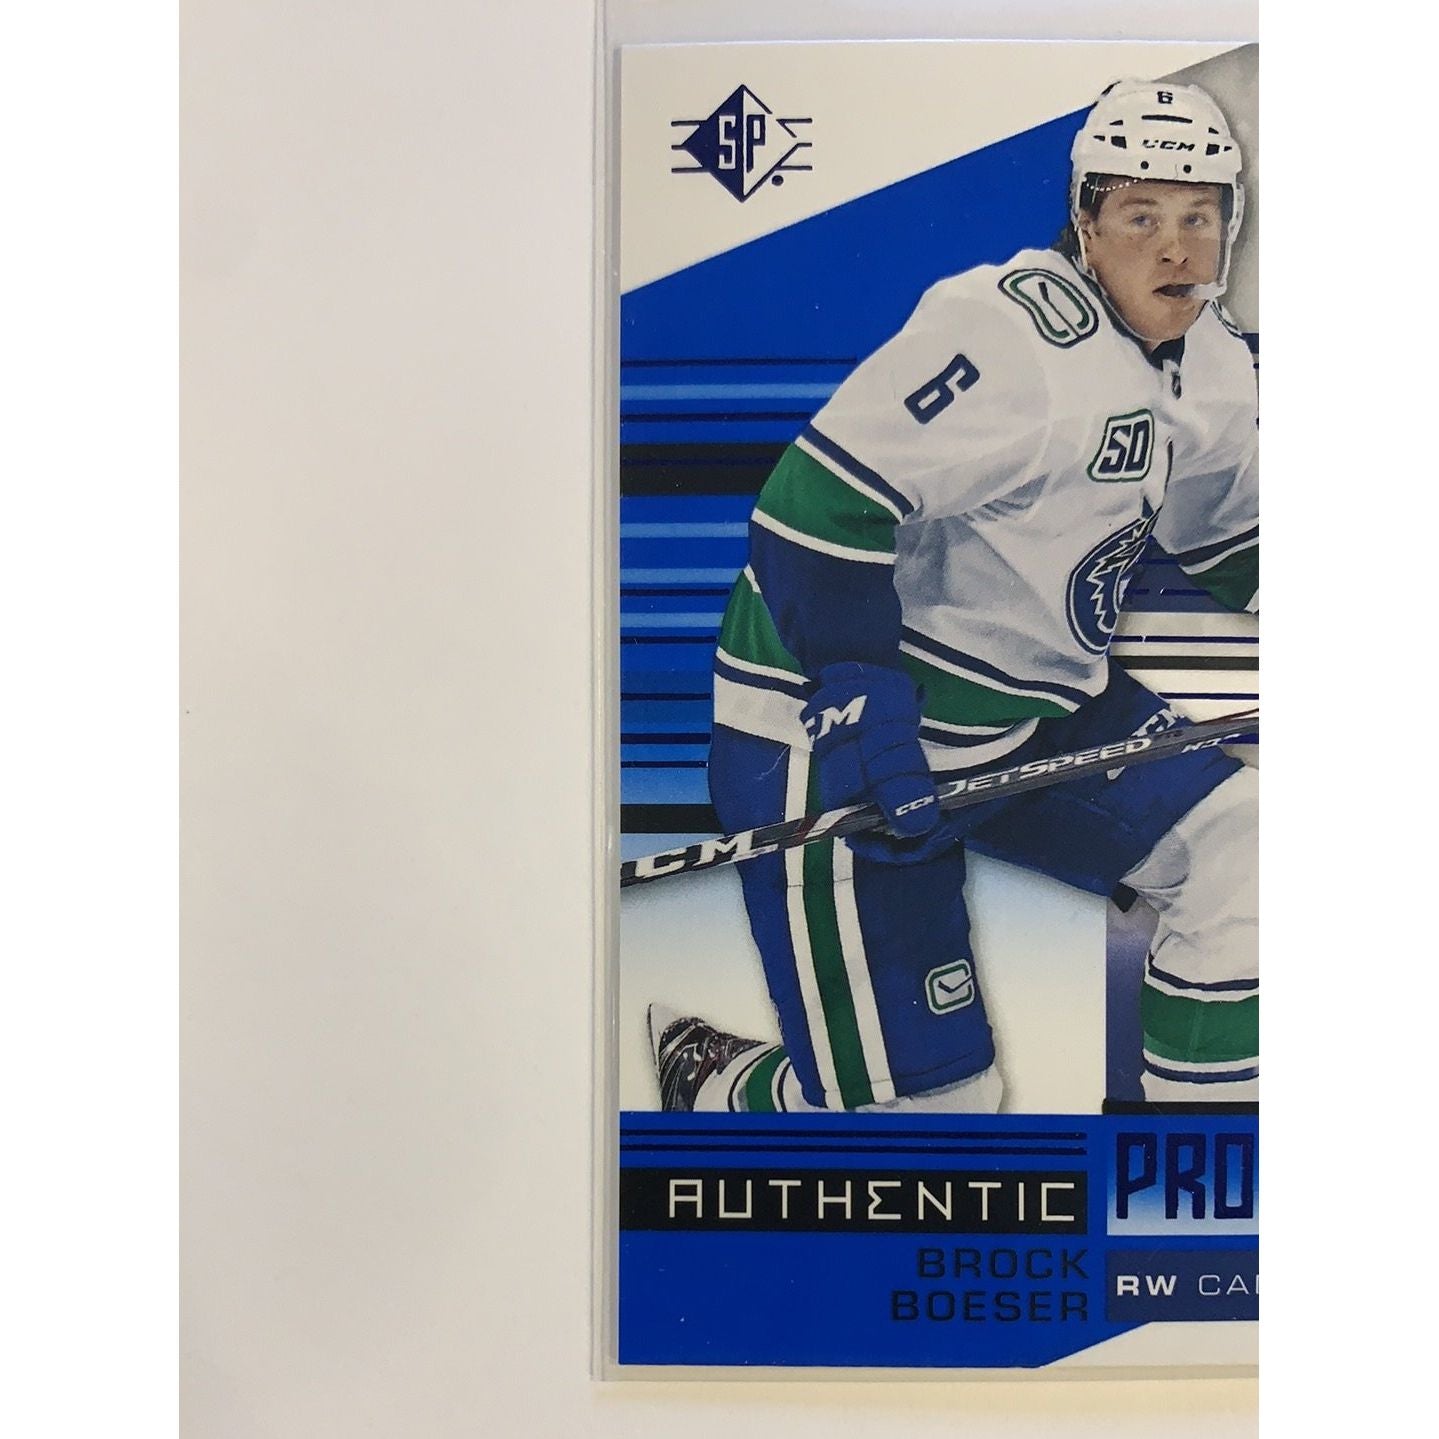  2019-20 SP Brock Boeser Authentic Pro Files  Local Legends Cards & Collectibles